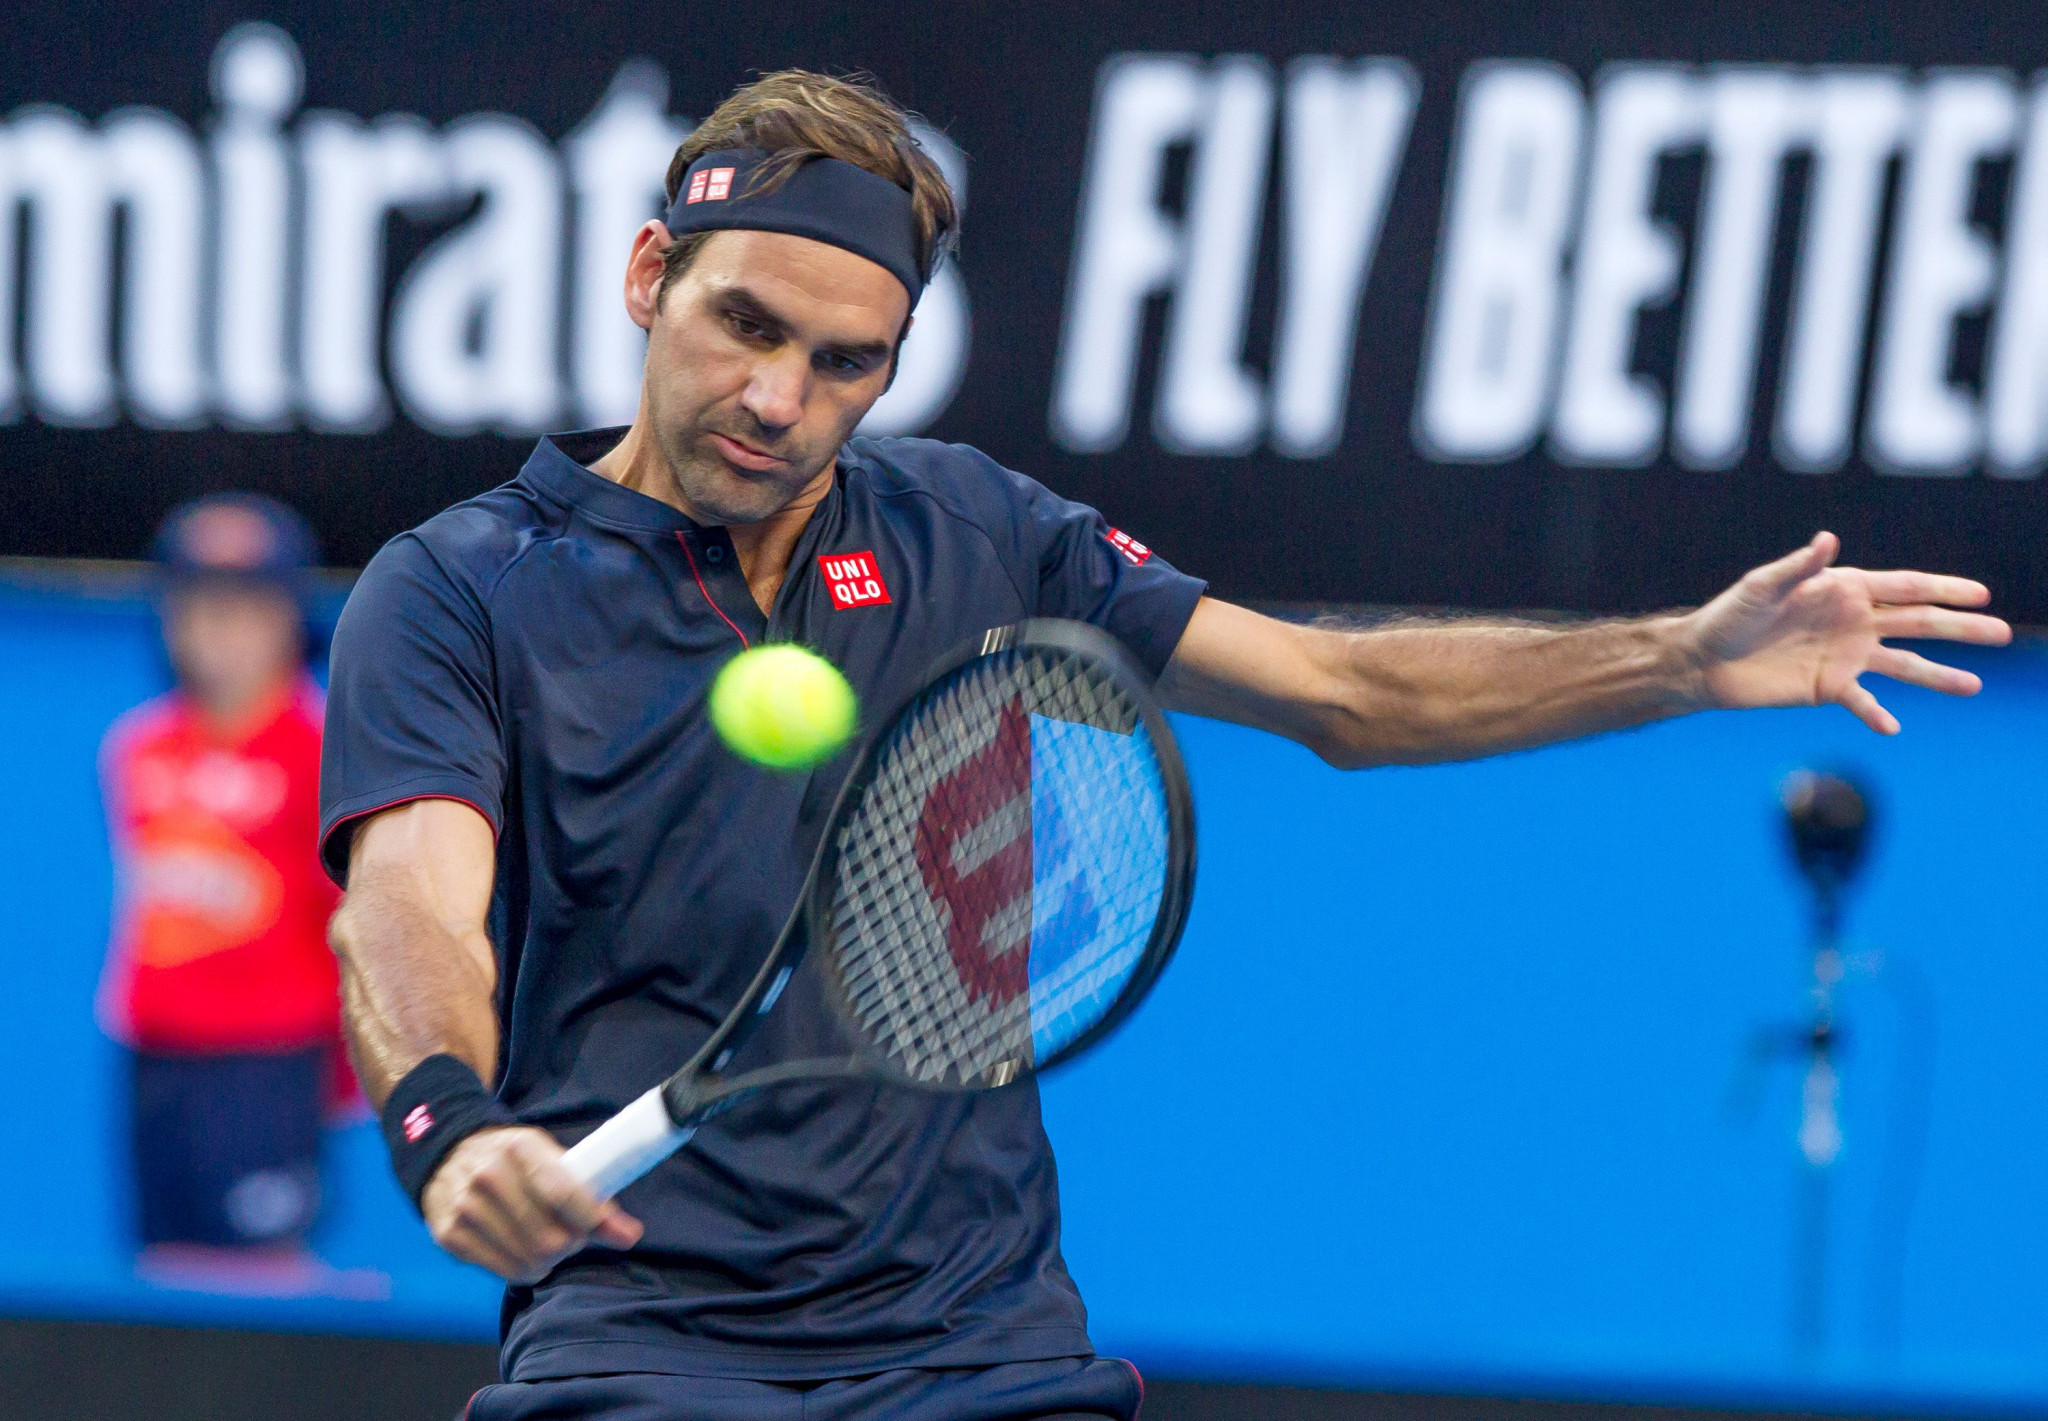 Roger Federer defeated Britain's Cameron Norrie to help Switzerland win its first tie of the Hopman Cup in Perth ©Getty Images